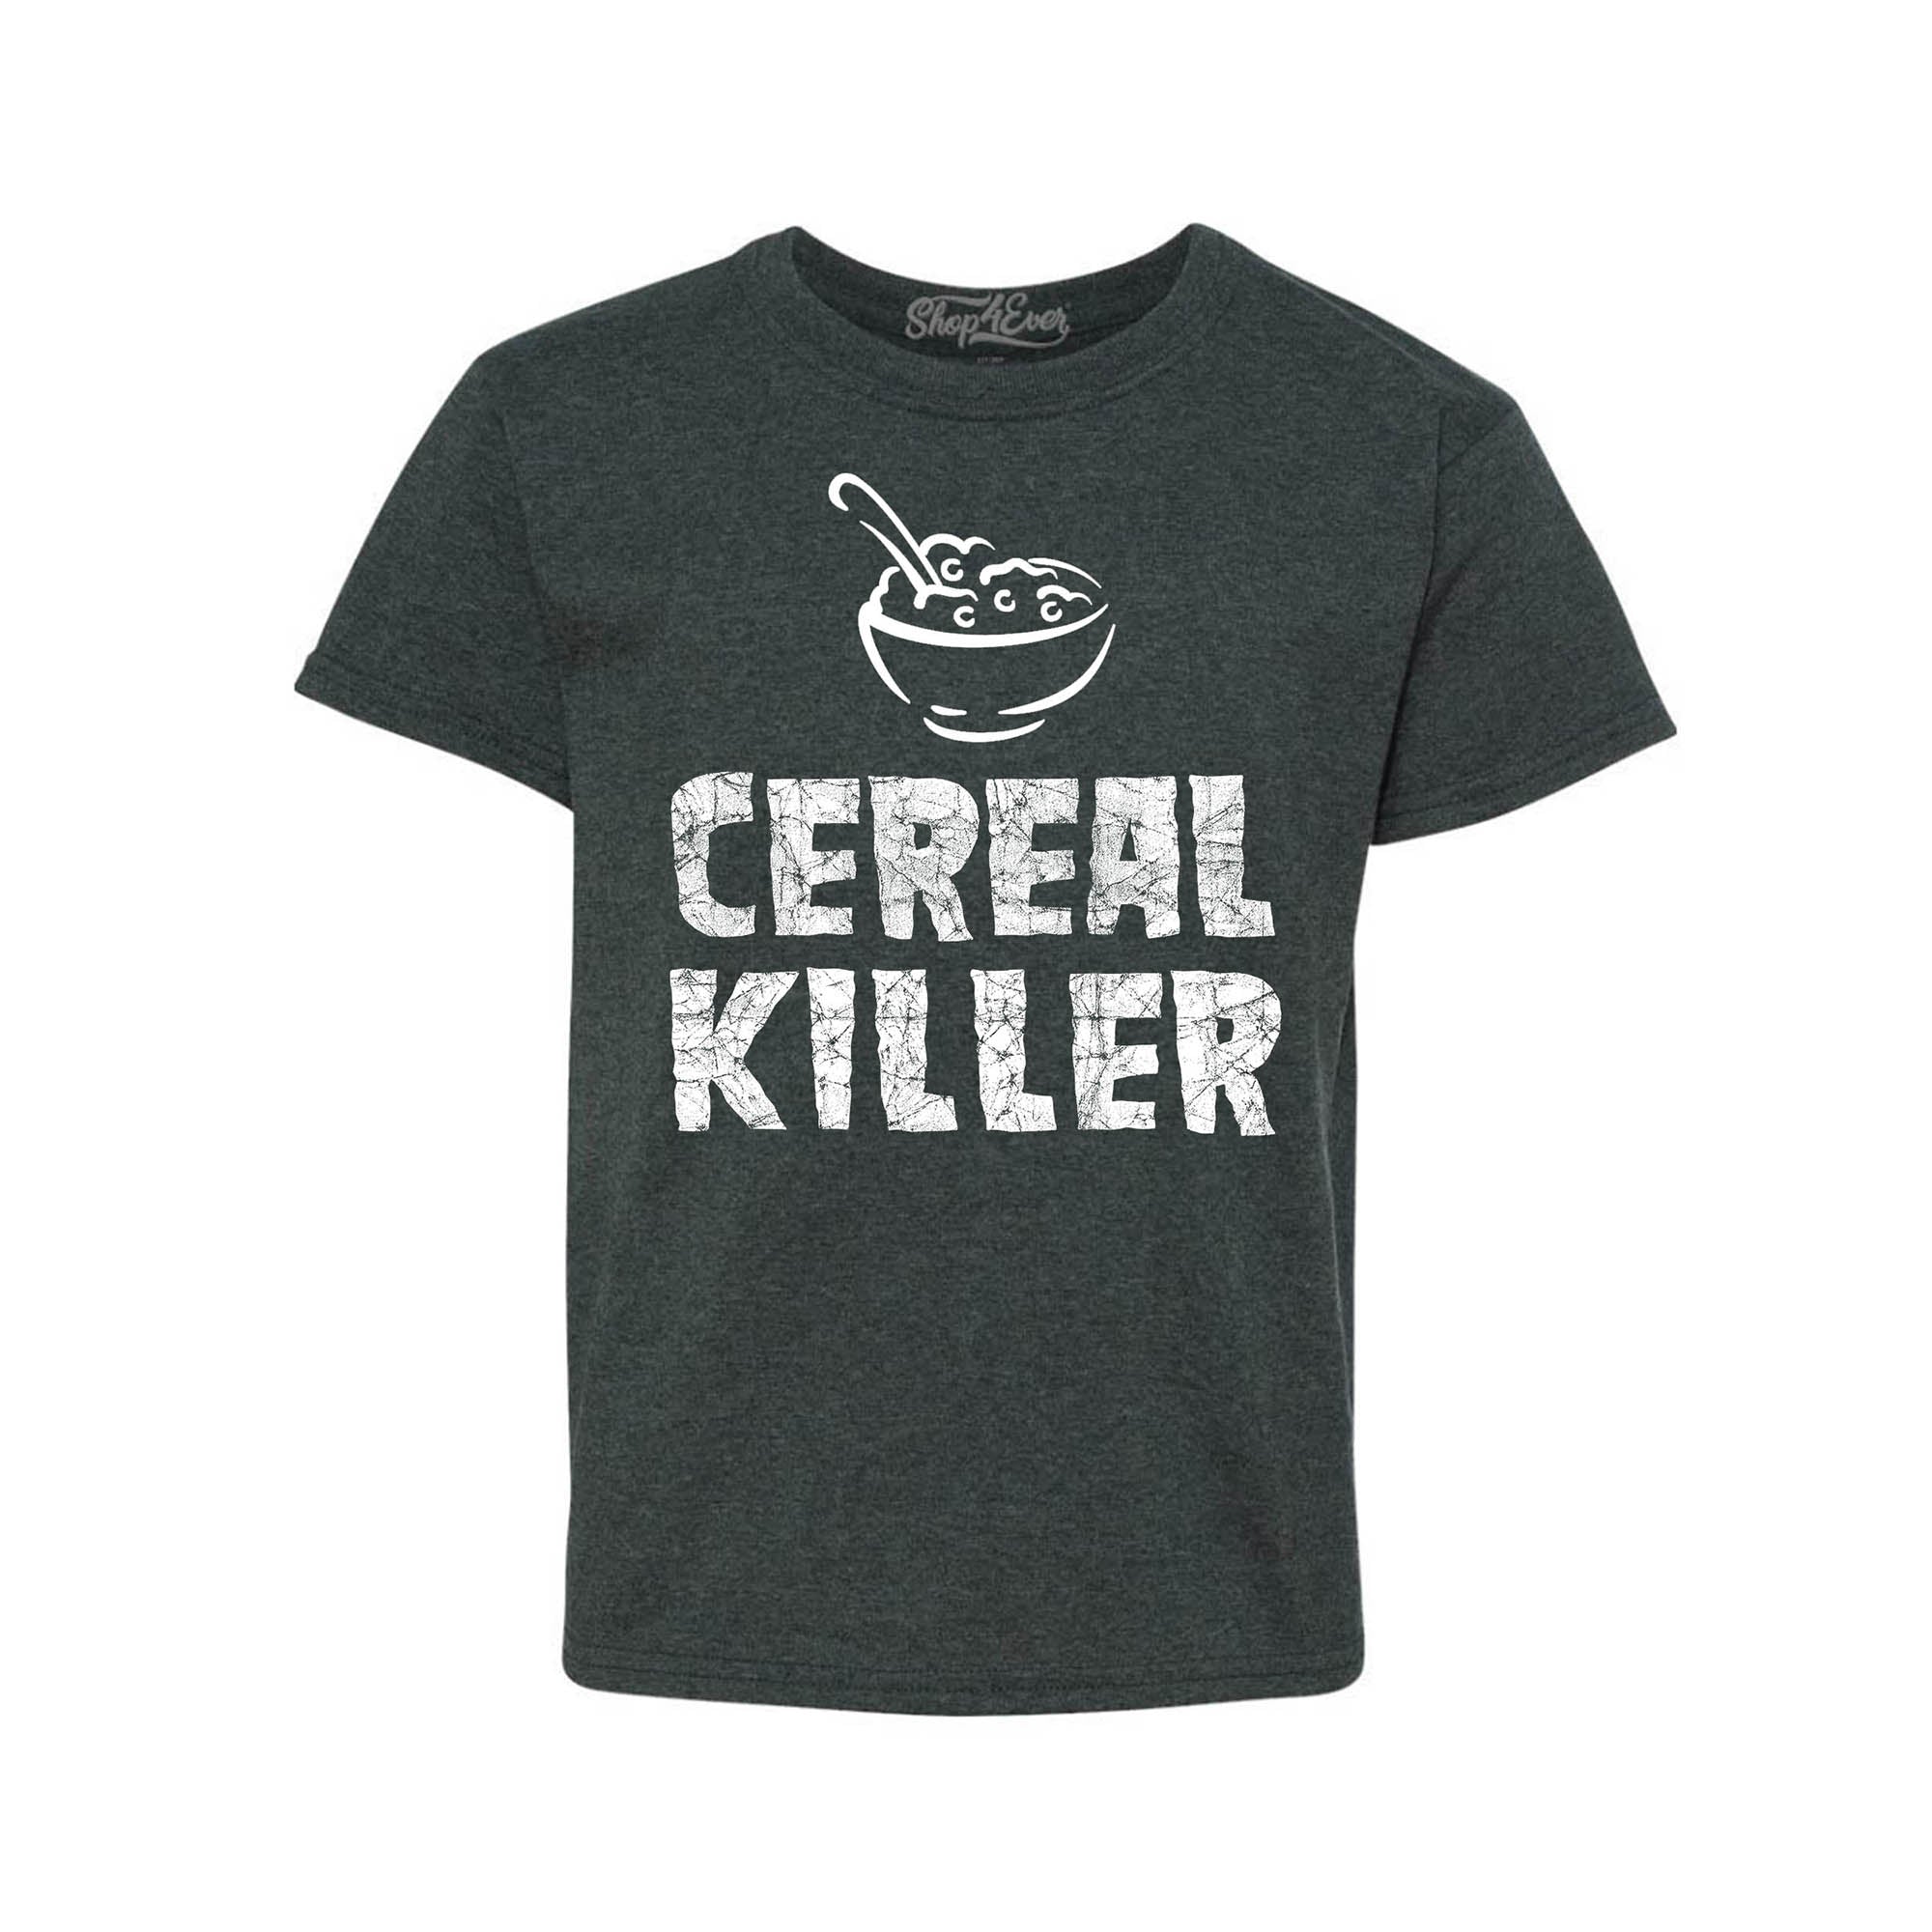 Cereal Killer Youth's T-Shirt Funny Kids Child Tee Shirts